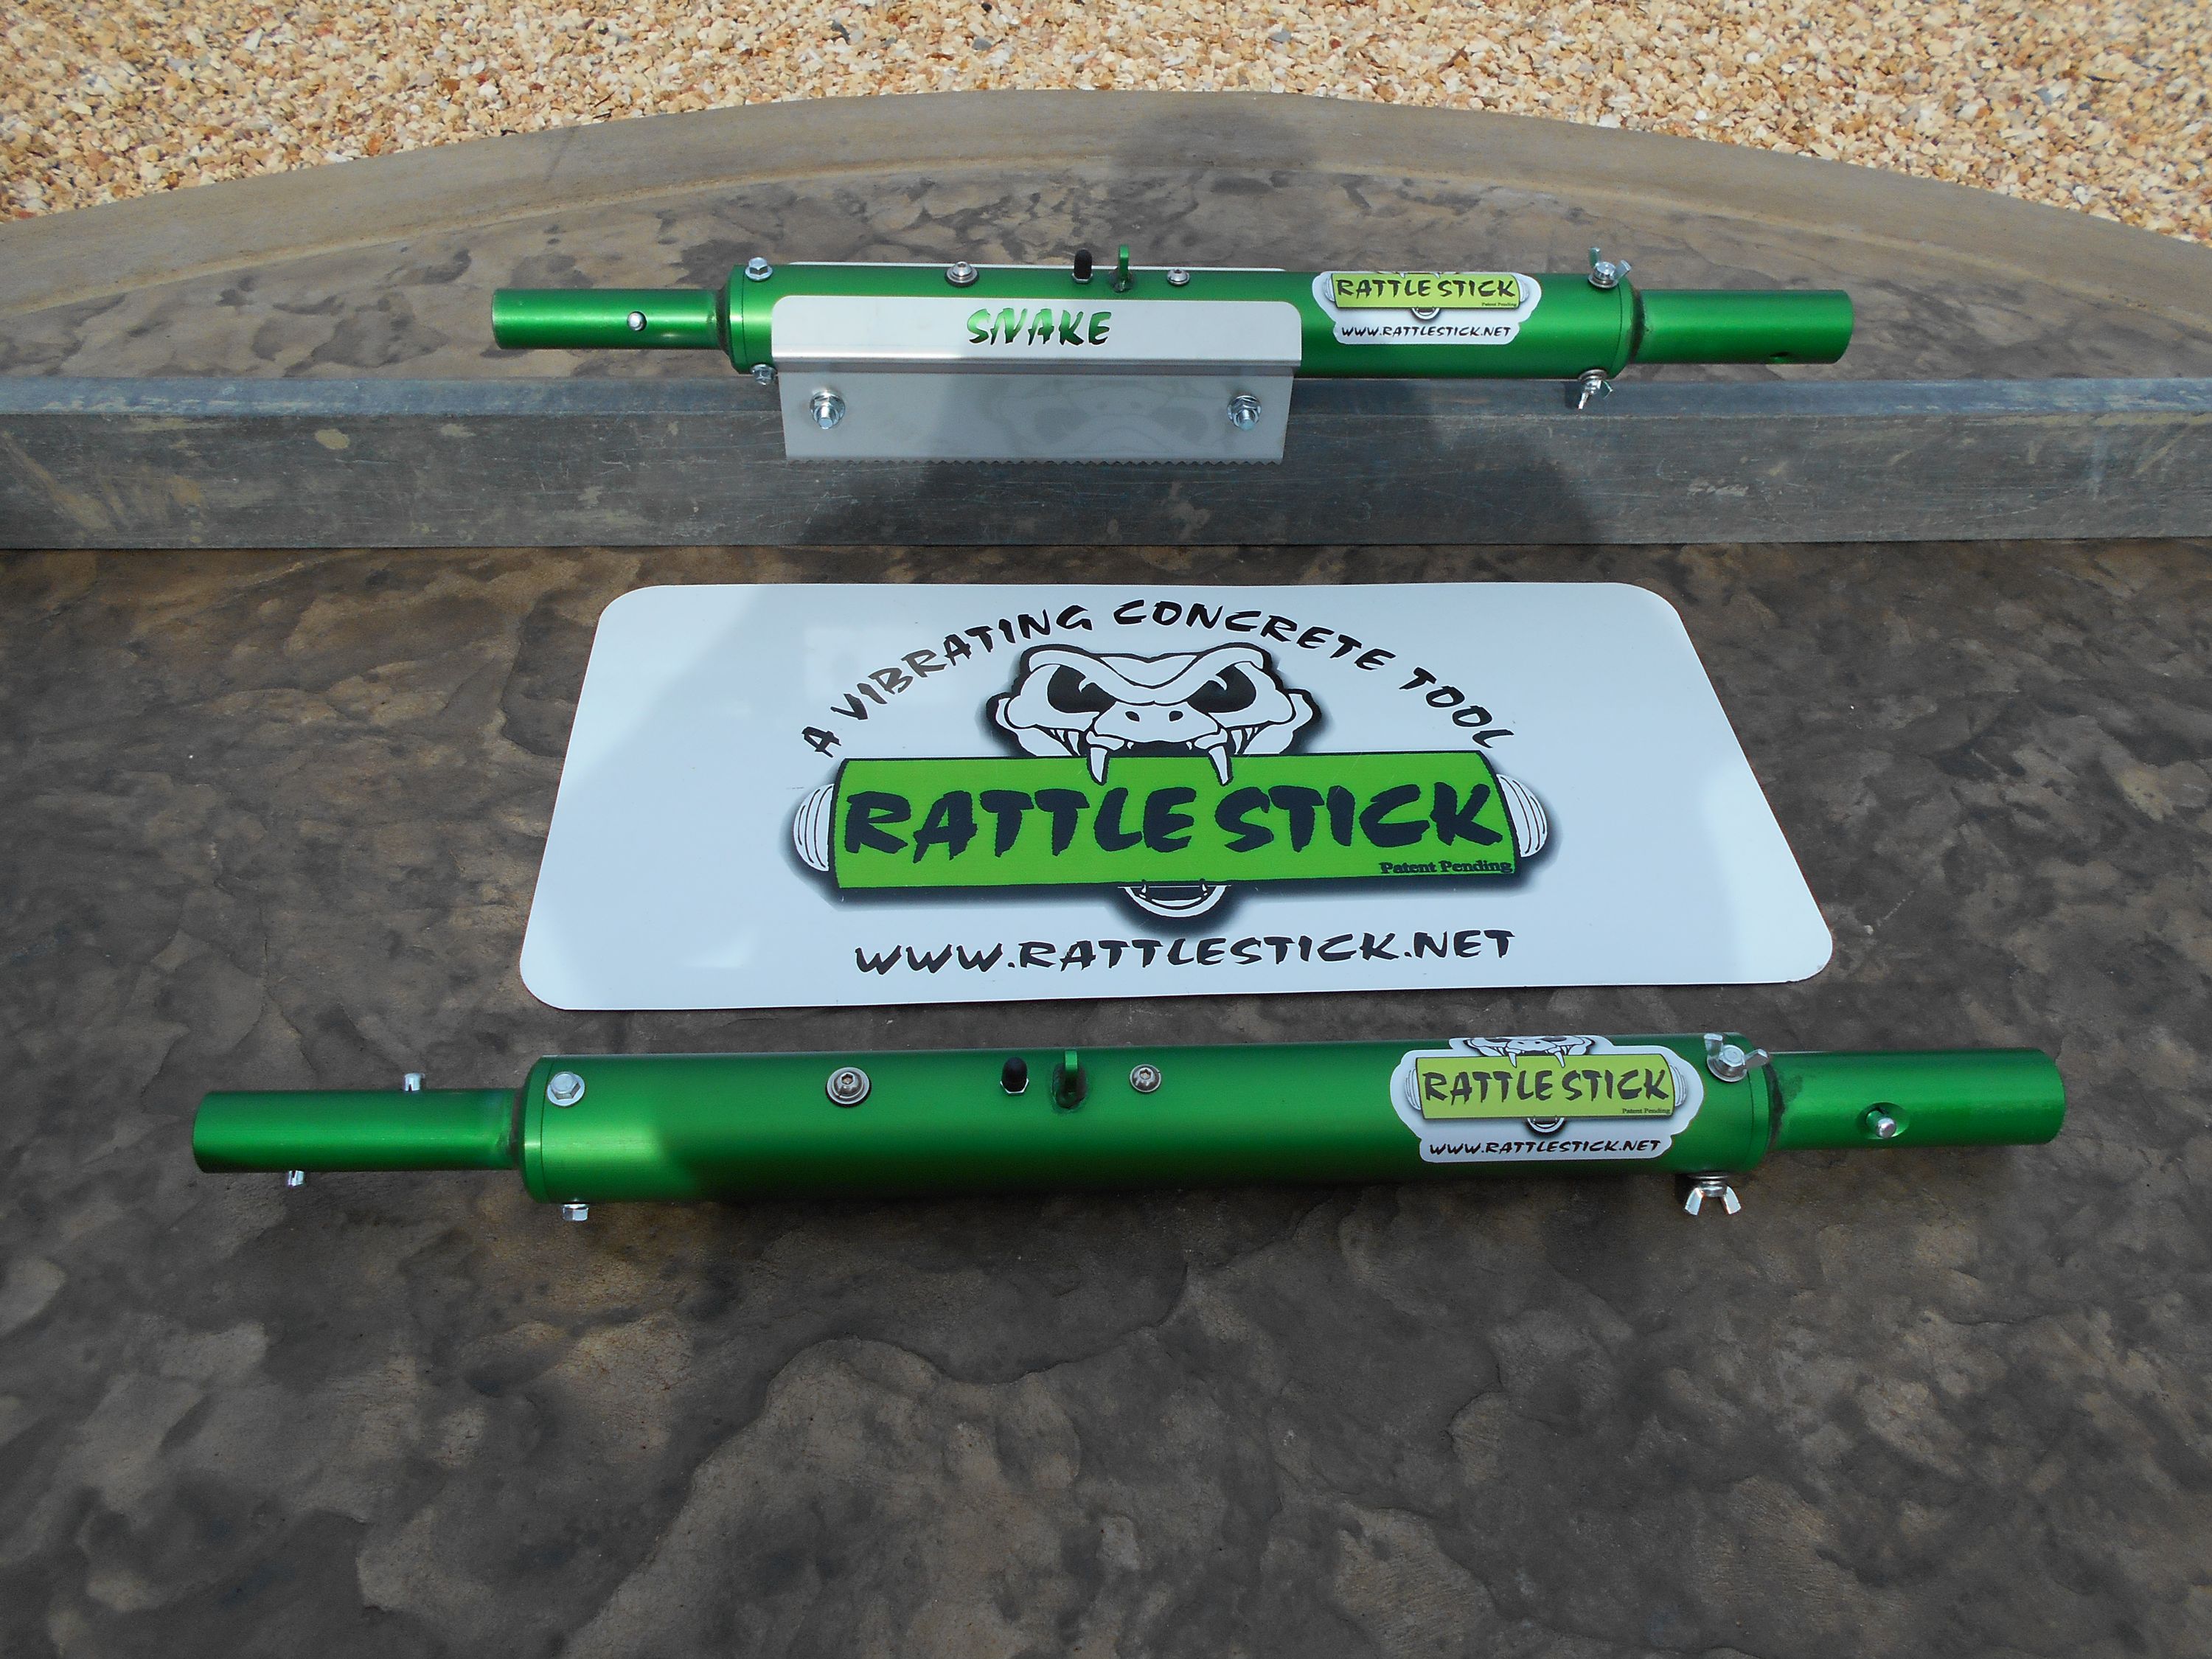 The Rattle Stick  a vibrating tool that attaches to walking tools such as bull floats, joint cutters and edgers  can also be more firmly affixed to aluminum screeds with the companys new Snake Bite screed bracket.